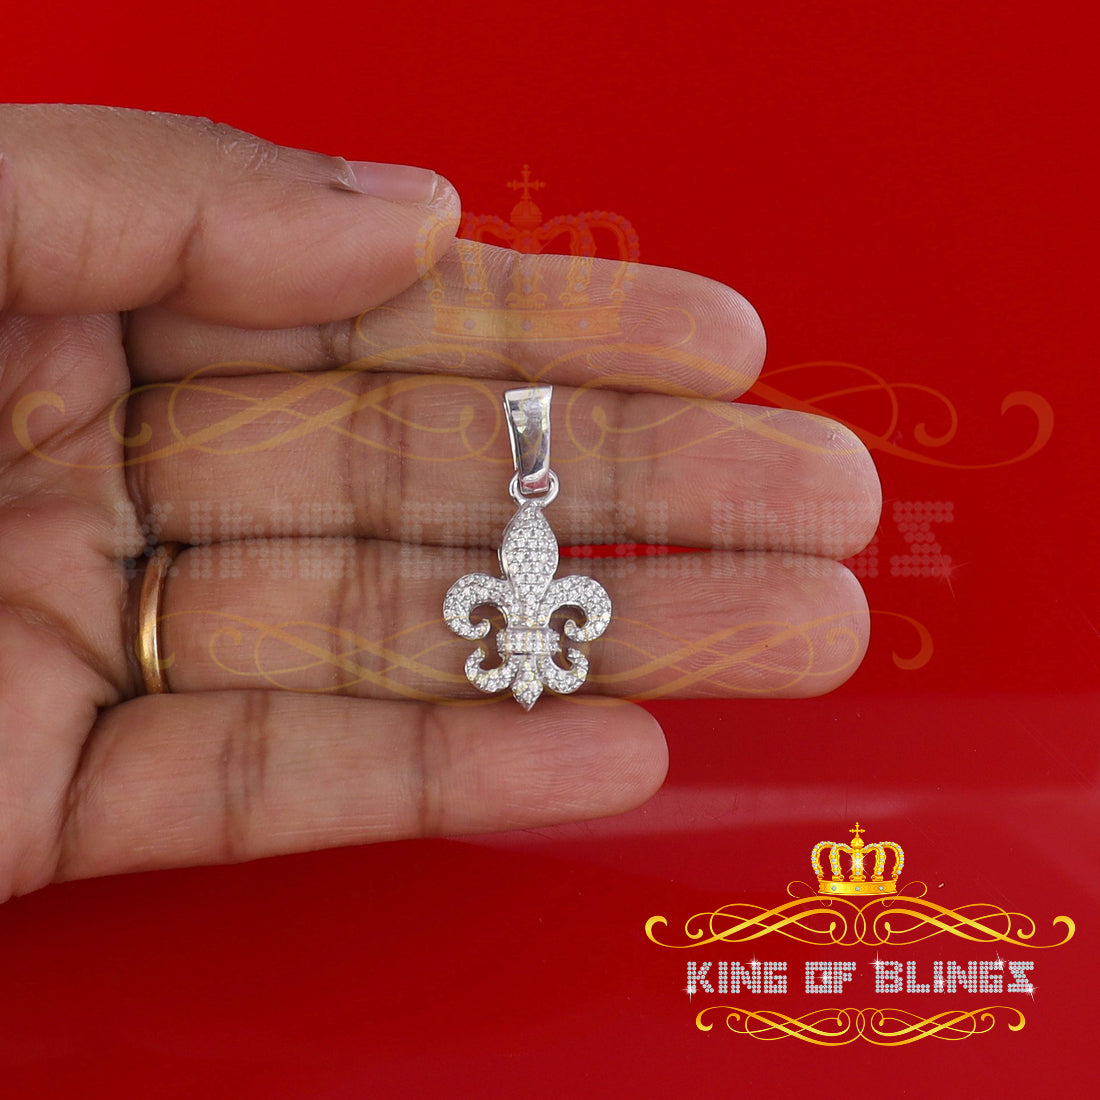 White Fleur de Lis Shape Sterling Silver Pendant with 0.88ct Cubic Zirconia KING OF BLINGS